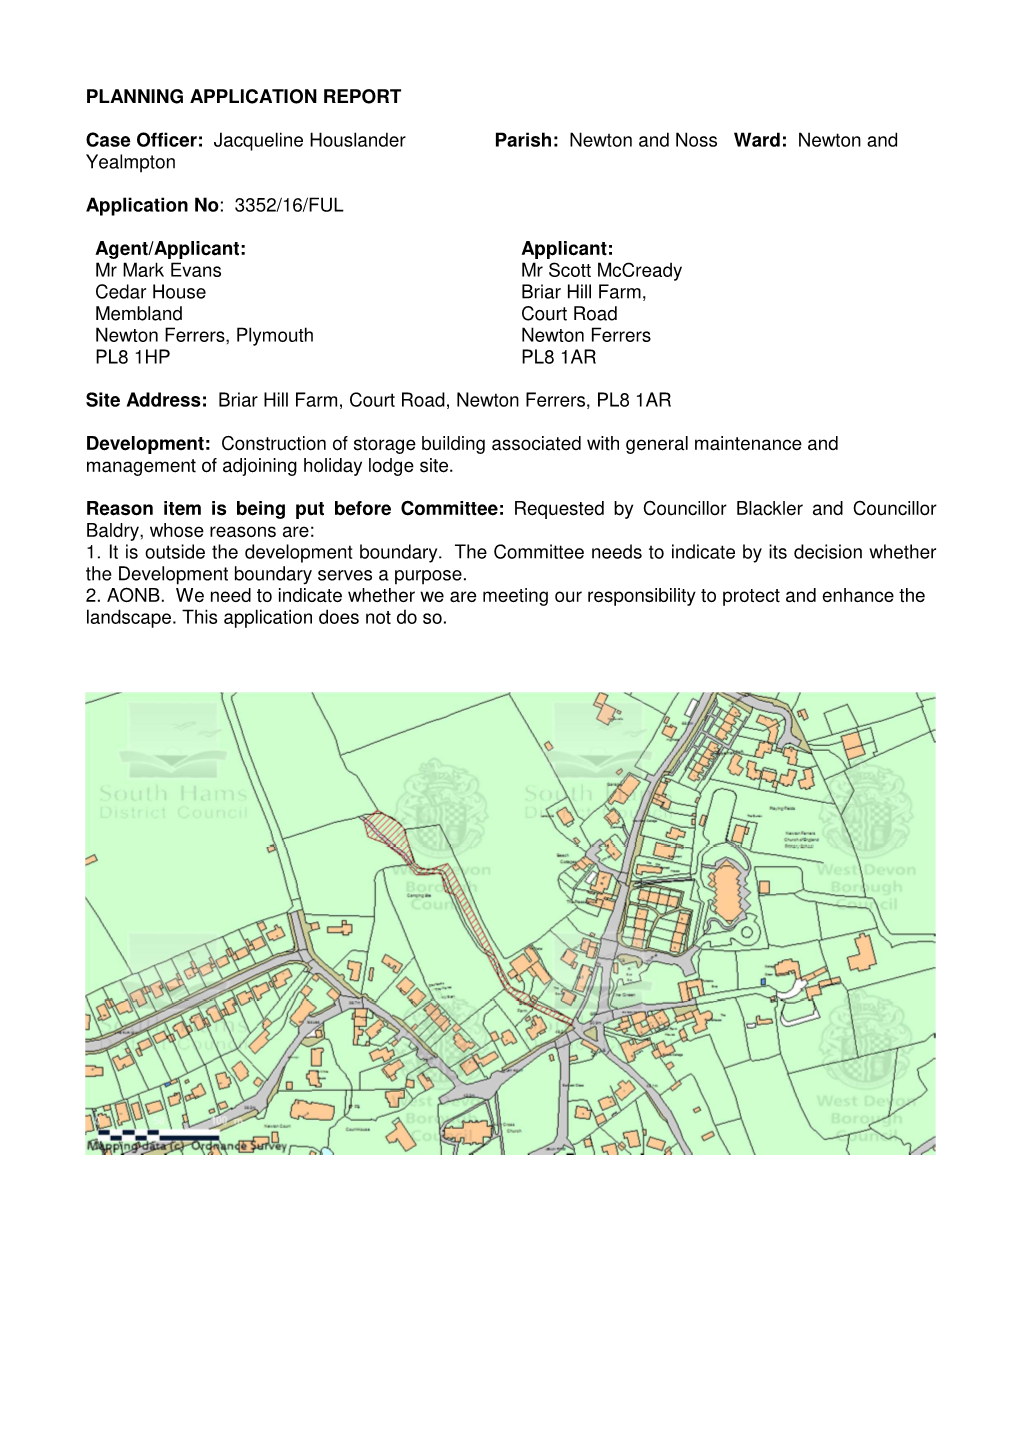 PLANNING APPLICATION REPORT Case Officer: Jacqueline Houslander Parish: Newton and Noss Ward: Newton and Yealmpton